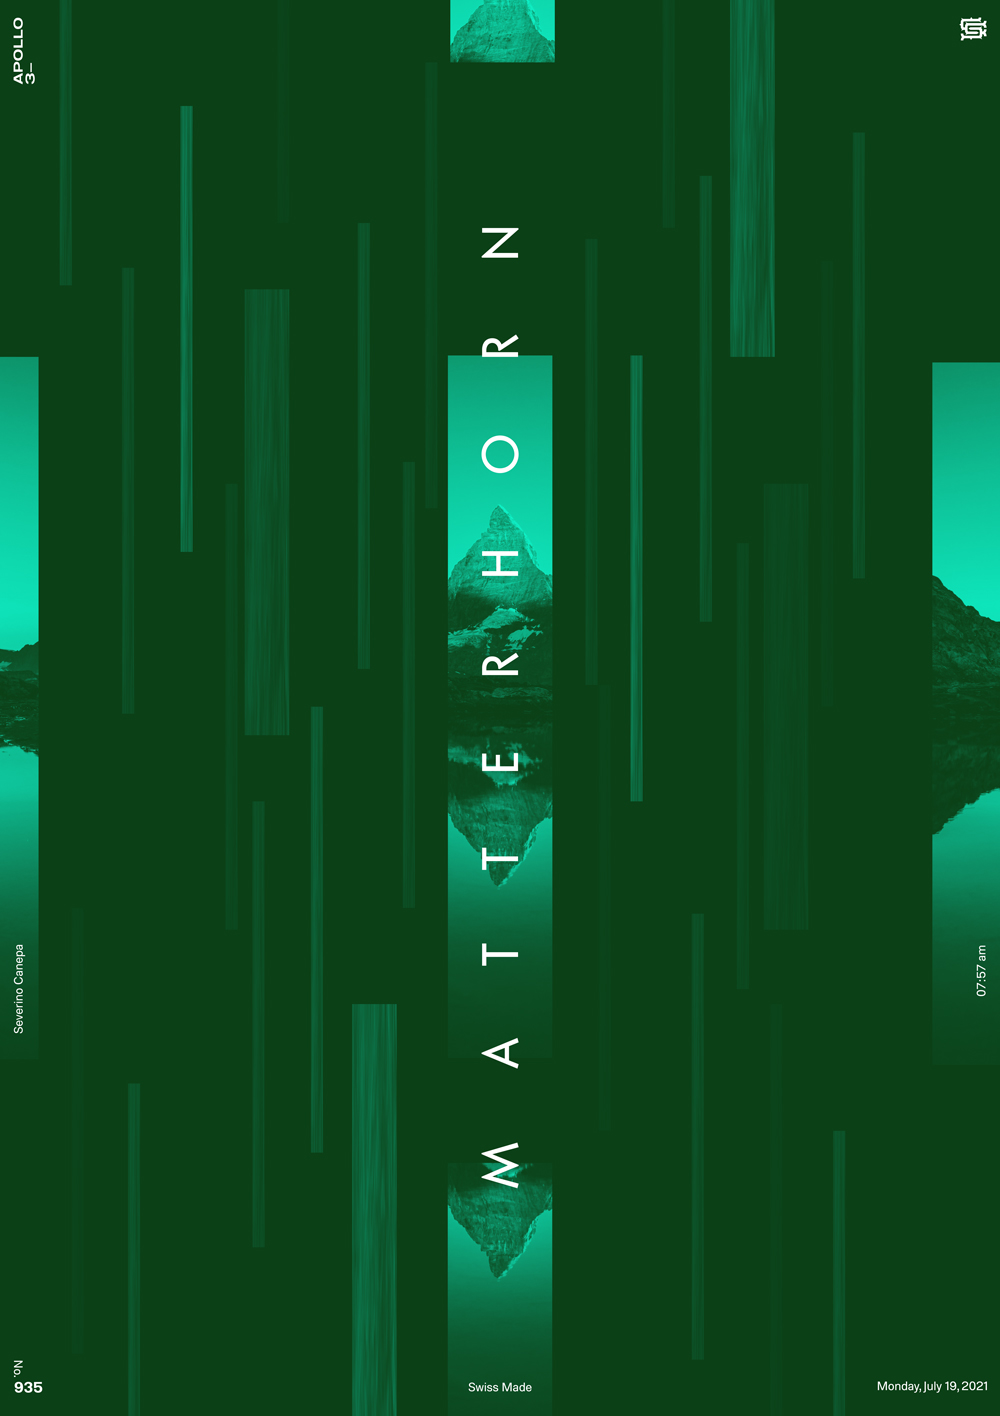 Minimalist poster design where I play with the photograph of a mountain